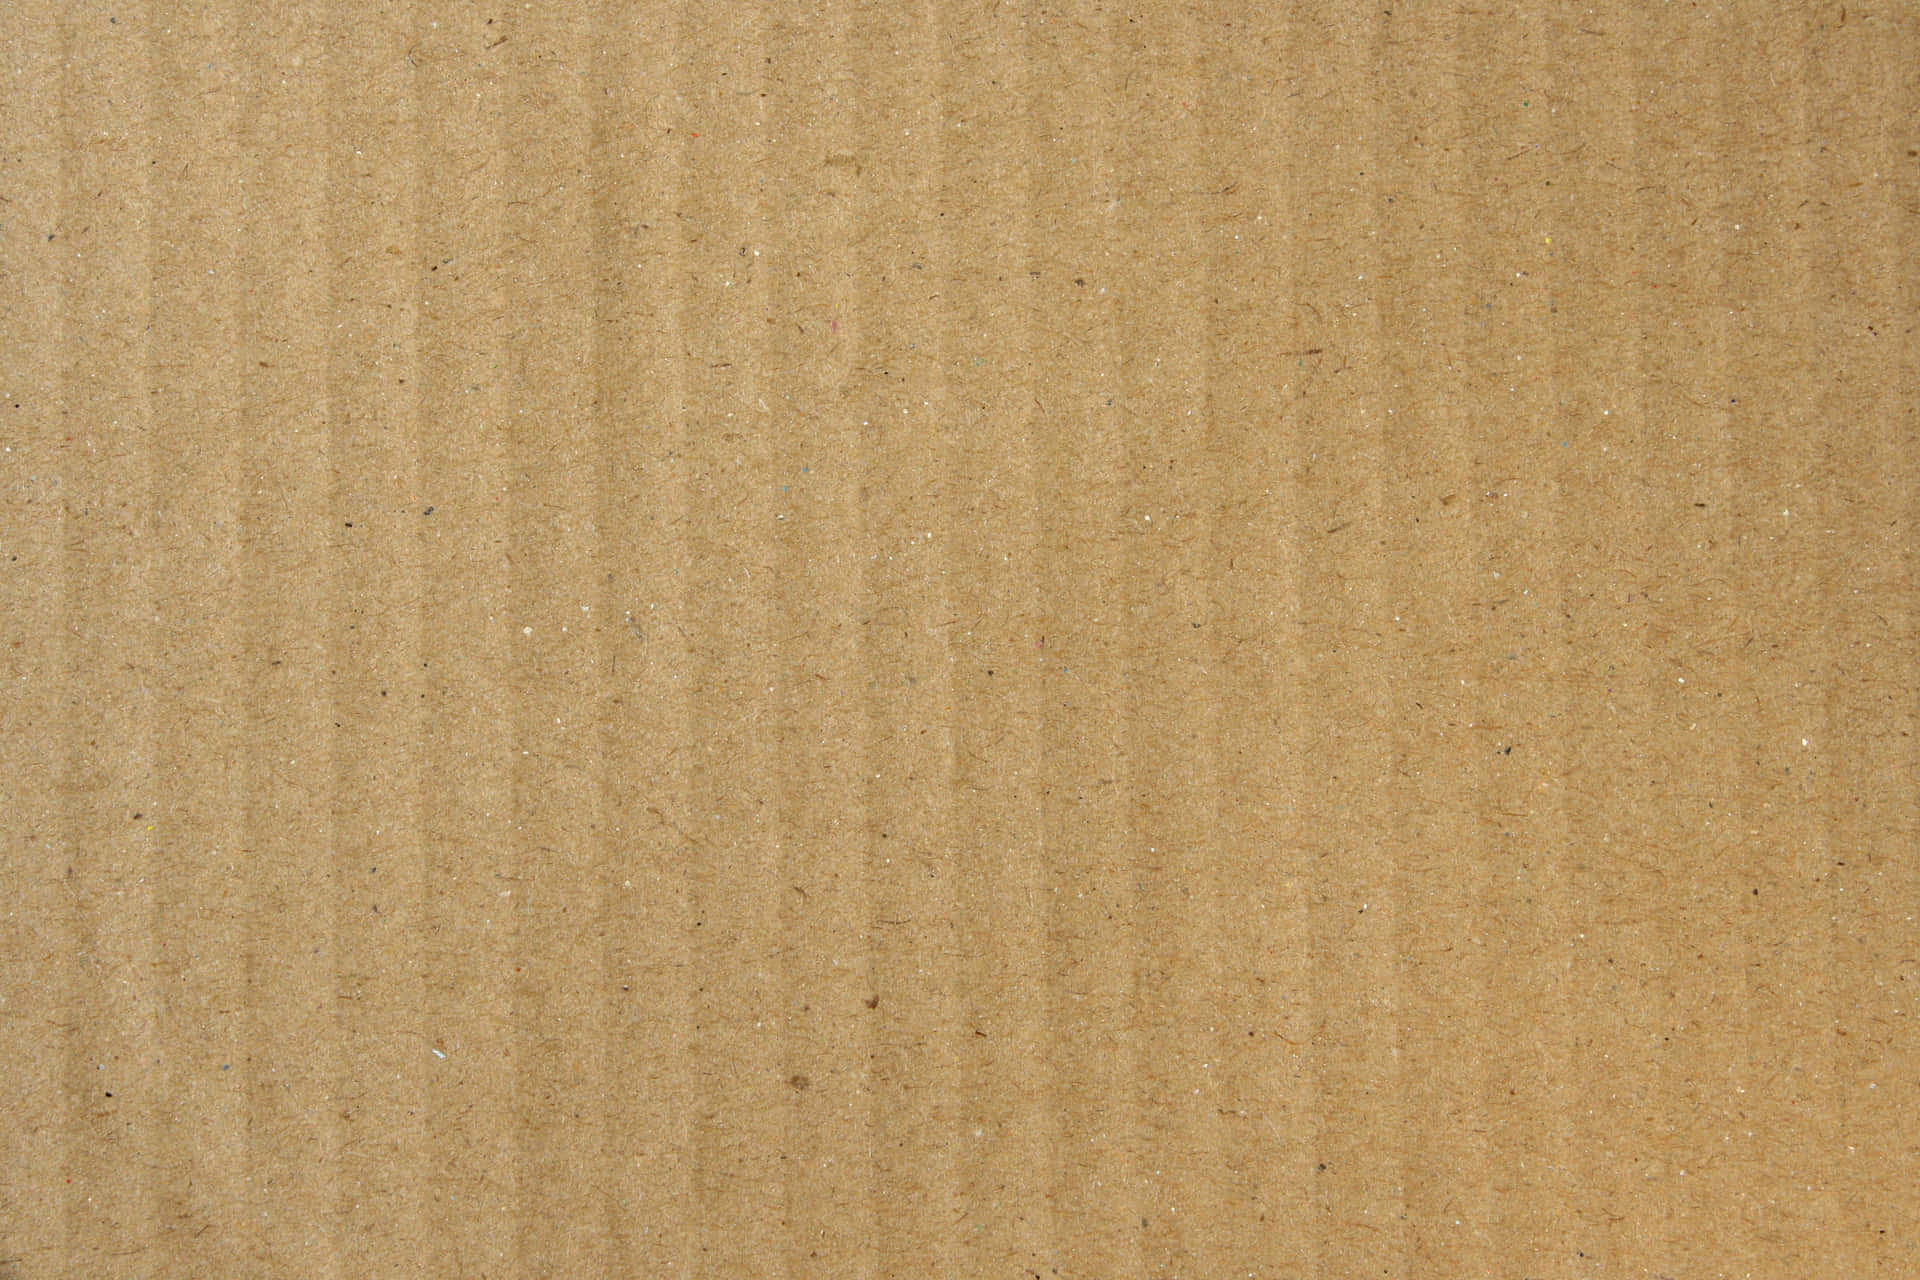 A Close Up Of A Brown Cardboard Background